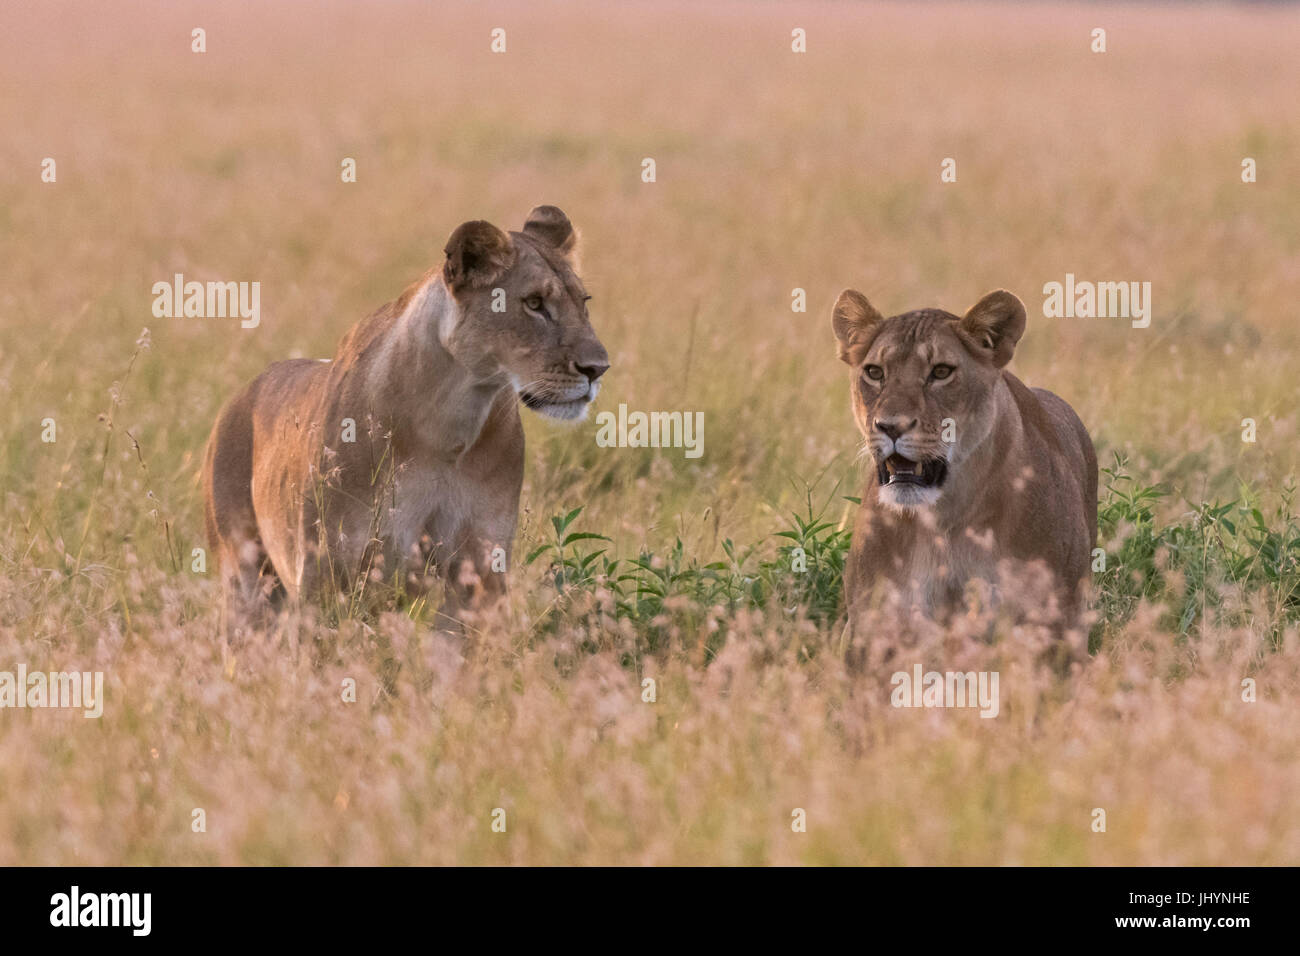 Portrait of two lionesses (Panthera leo) in the savannah, Masai Mara, Kenya, East Africa, Africa Stock Photo